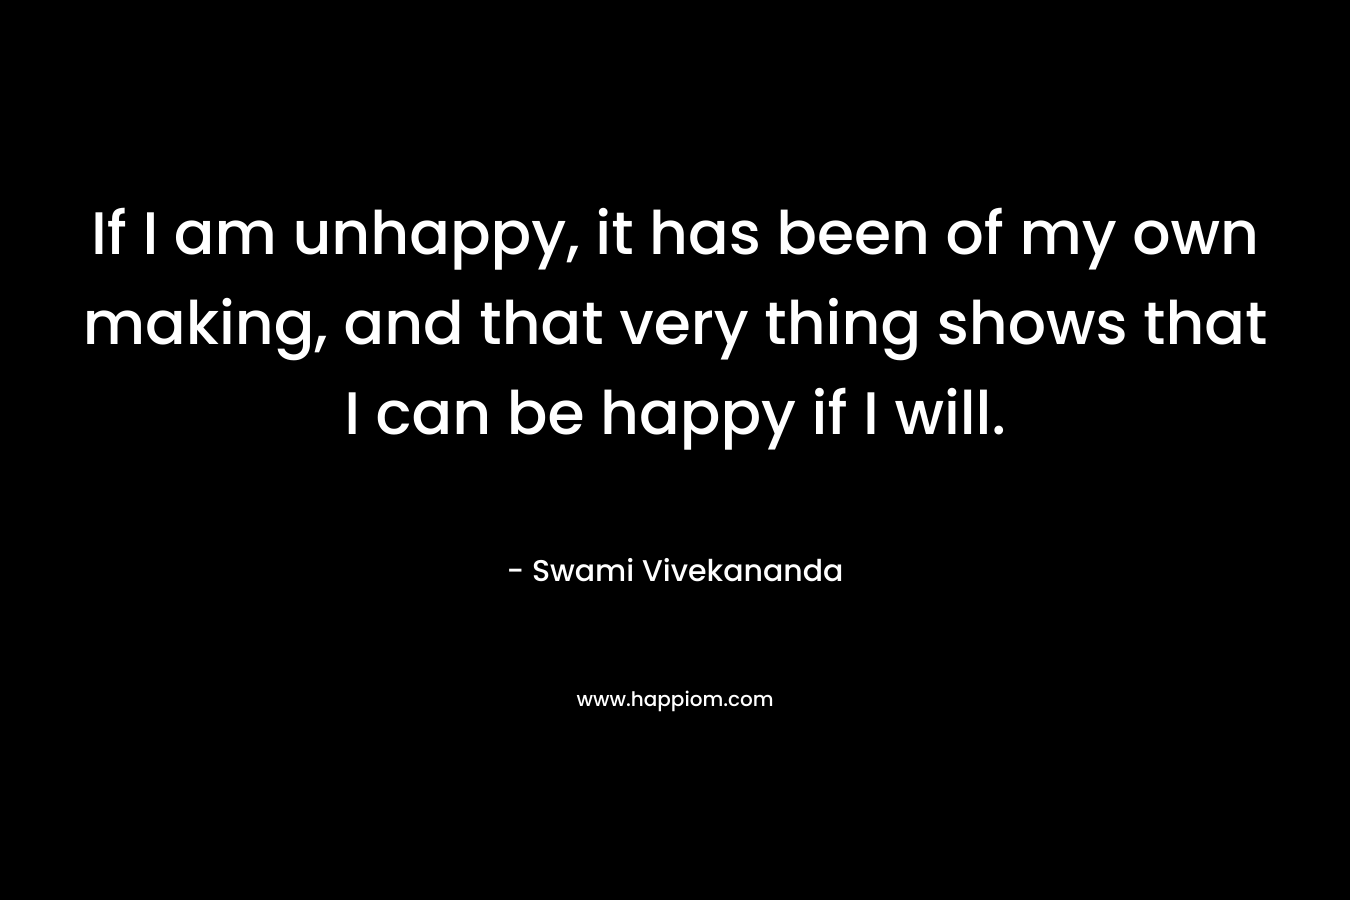 If I am unhappy, it has been of my own making, and that very thing shows that I can be happy if I will. – Swami Vivekananda